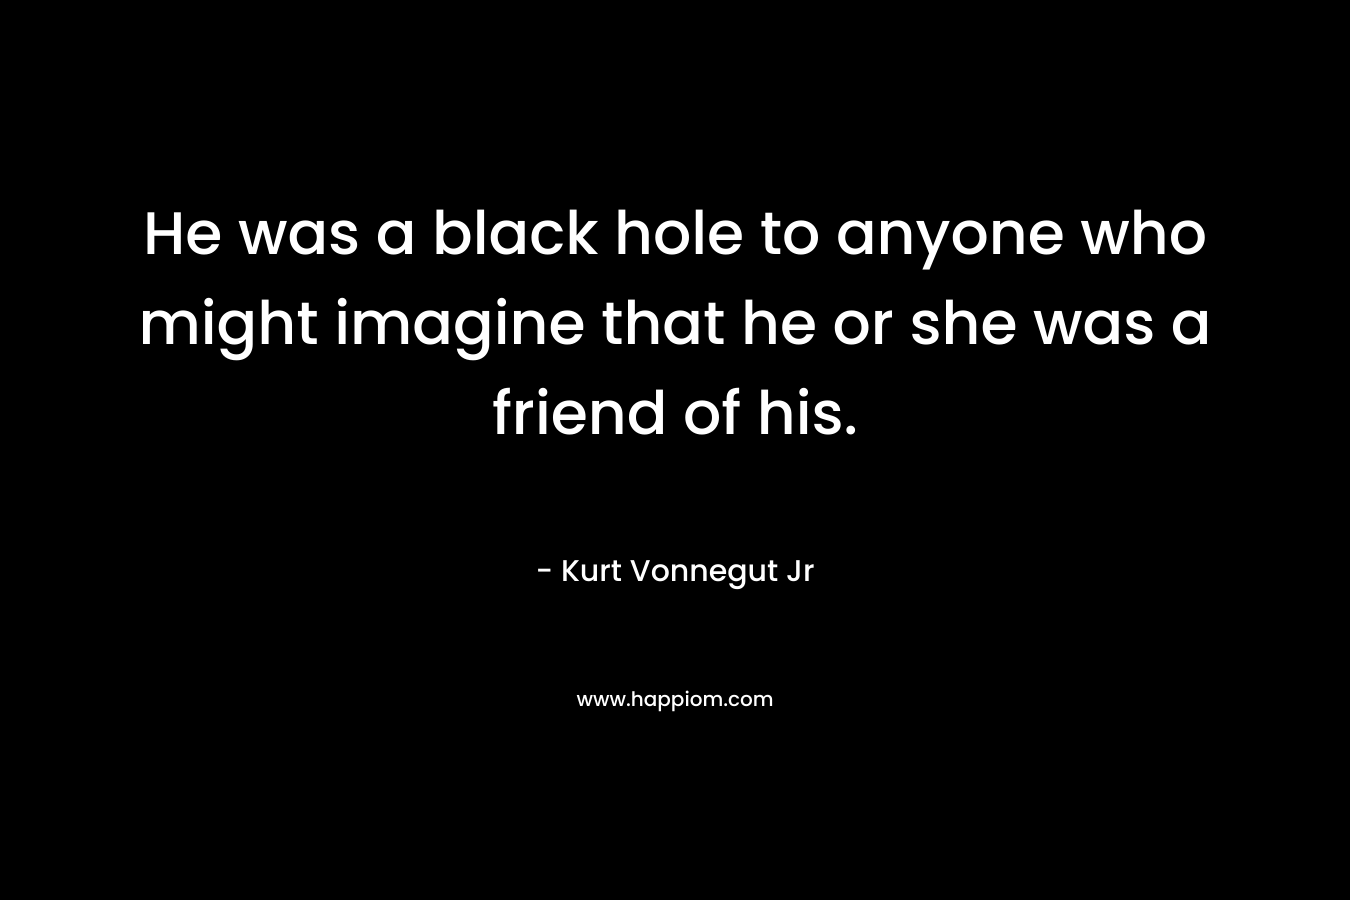 He was a black hole to anyone who might imagine that he or she was a friend of his. – Kurt Vonnegut Jr